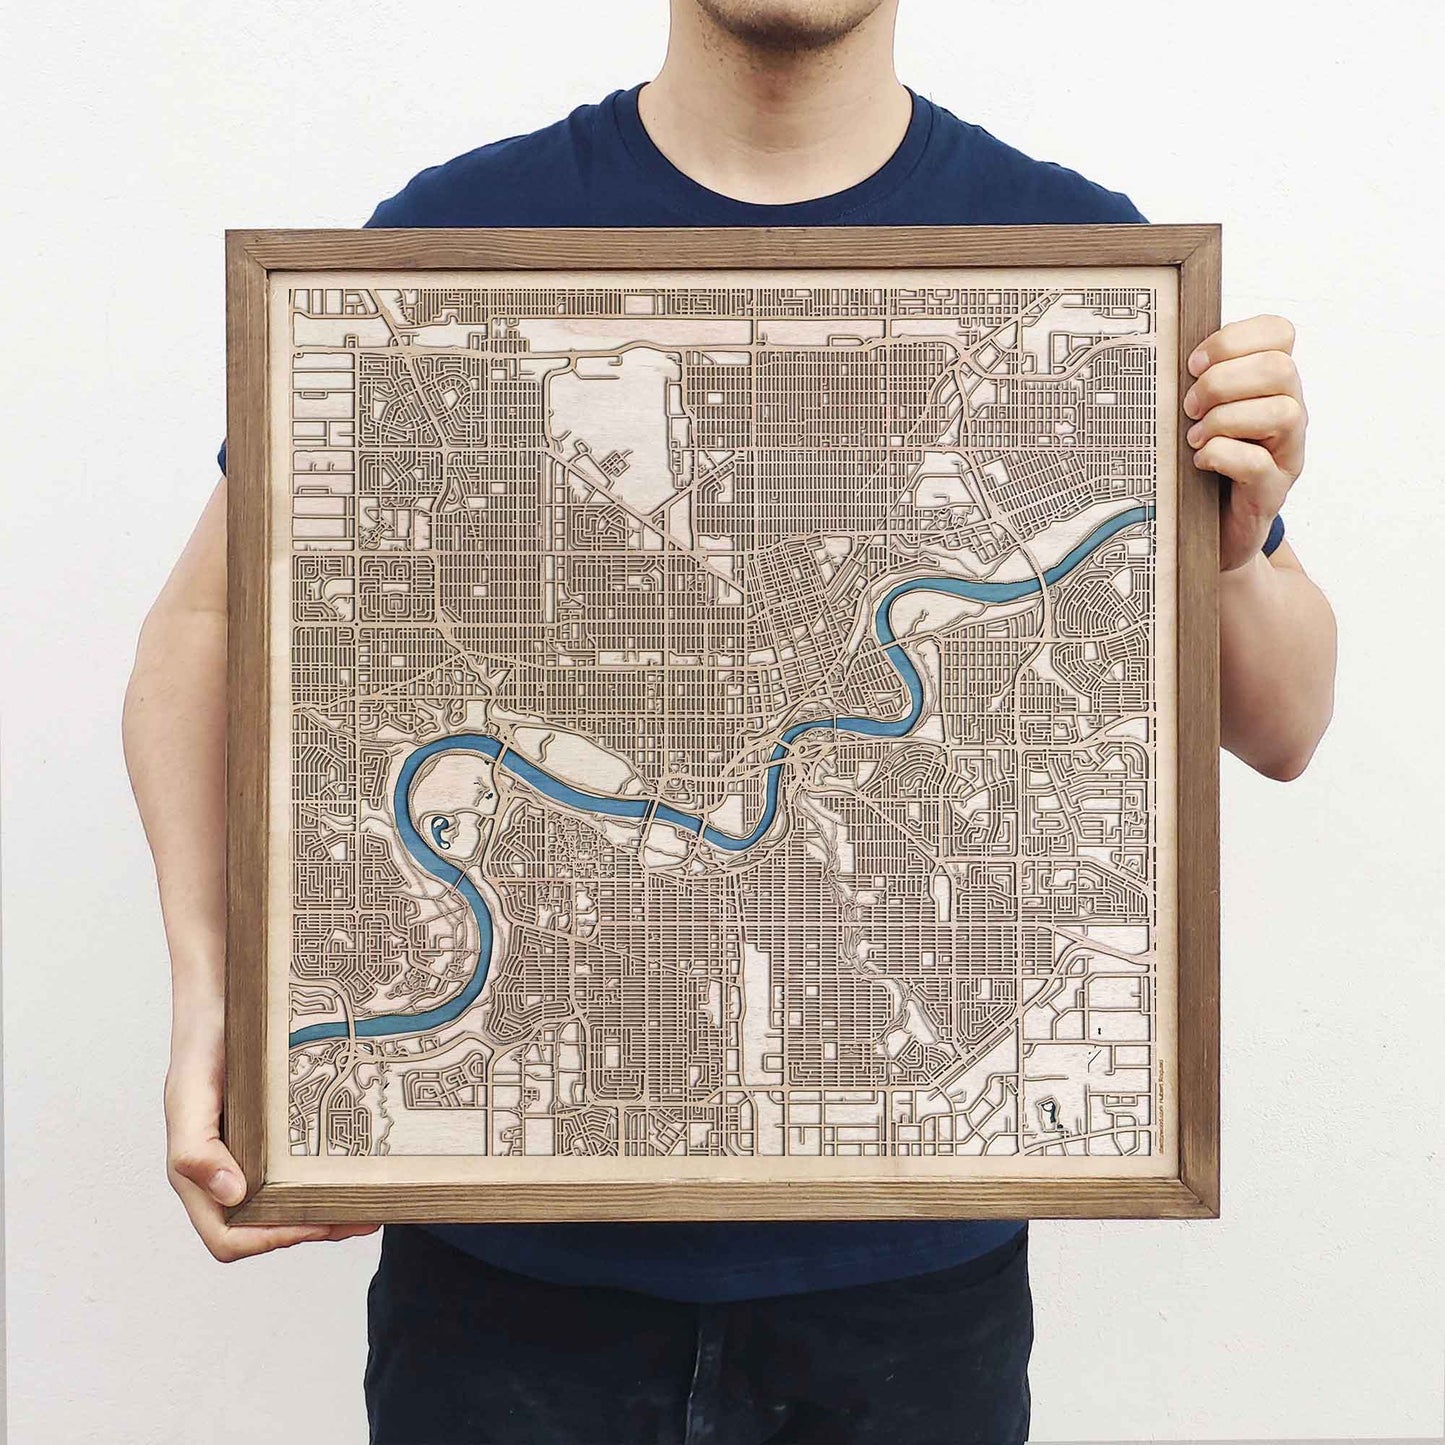 Edmonton Wooden Map by CityWood - Custom Wood Map Art - Unique Laser Cut Engraved - Anniversary Gift